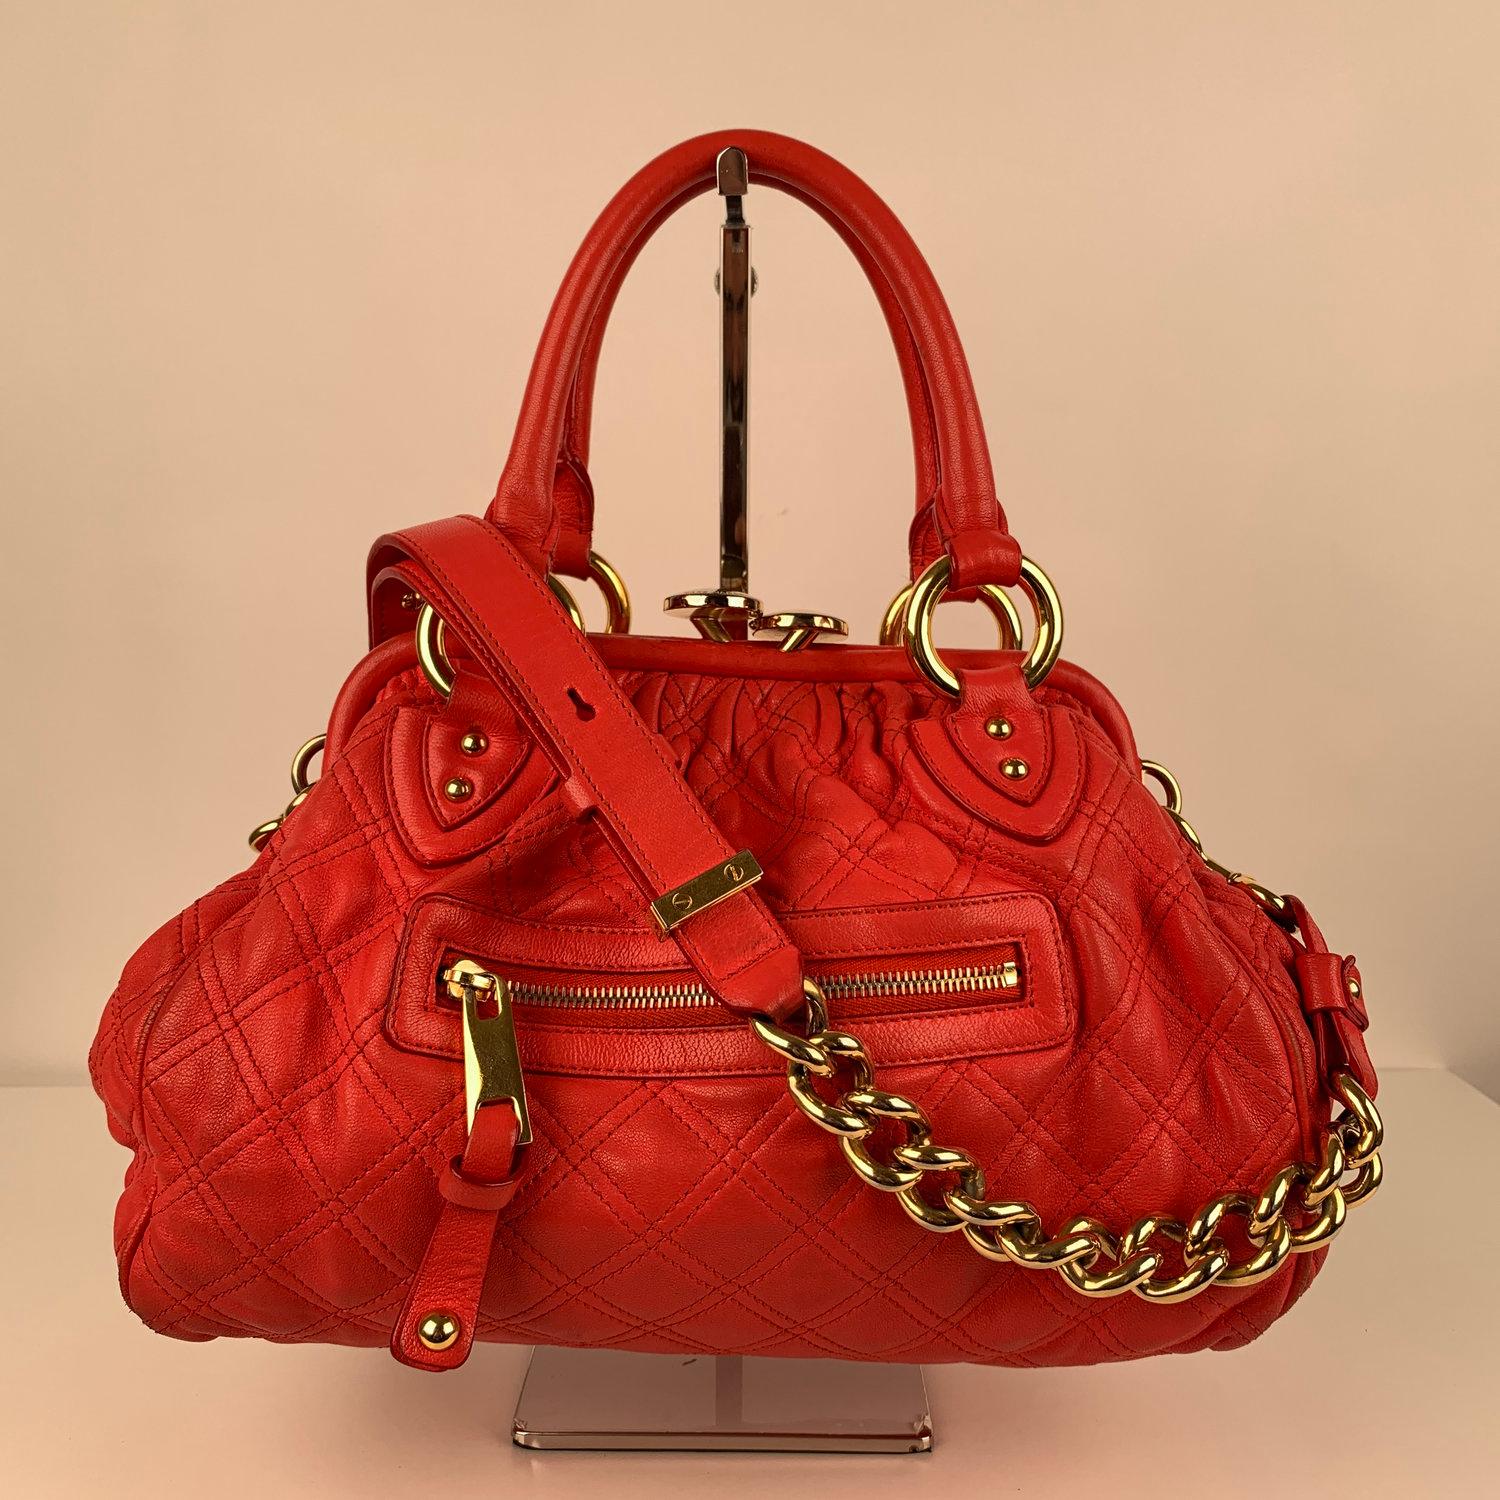 MATERIAL: Leather COLOR: Red MODEL: Stam Doctor Bag GENDER: Women SIZE: Medium Condition CONDITION DETAILS: B :GOOD CONDITION - Some light wear of use - Some wear of use on bottom corners (darkness and scuffing), some darkness on leather on the